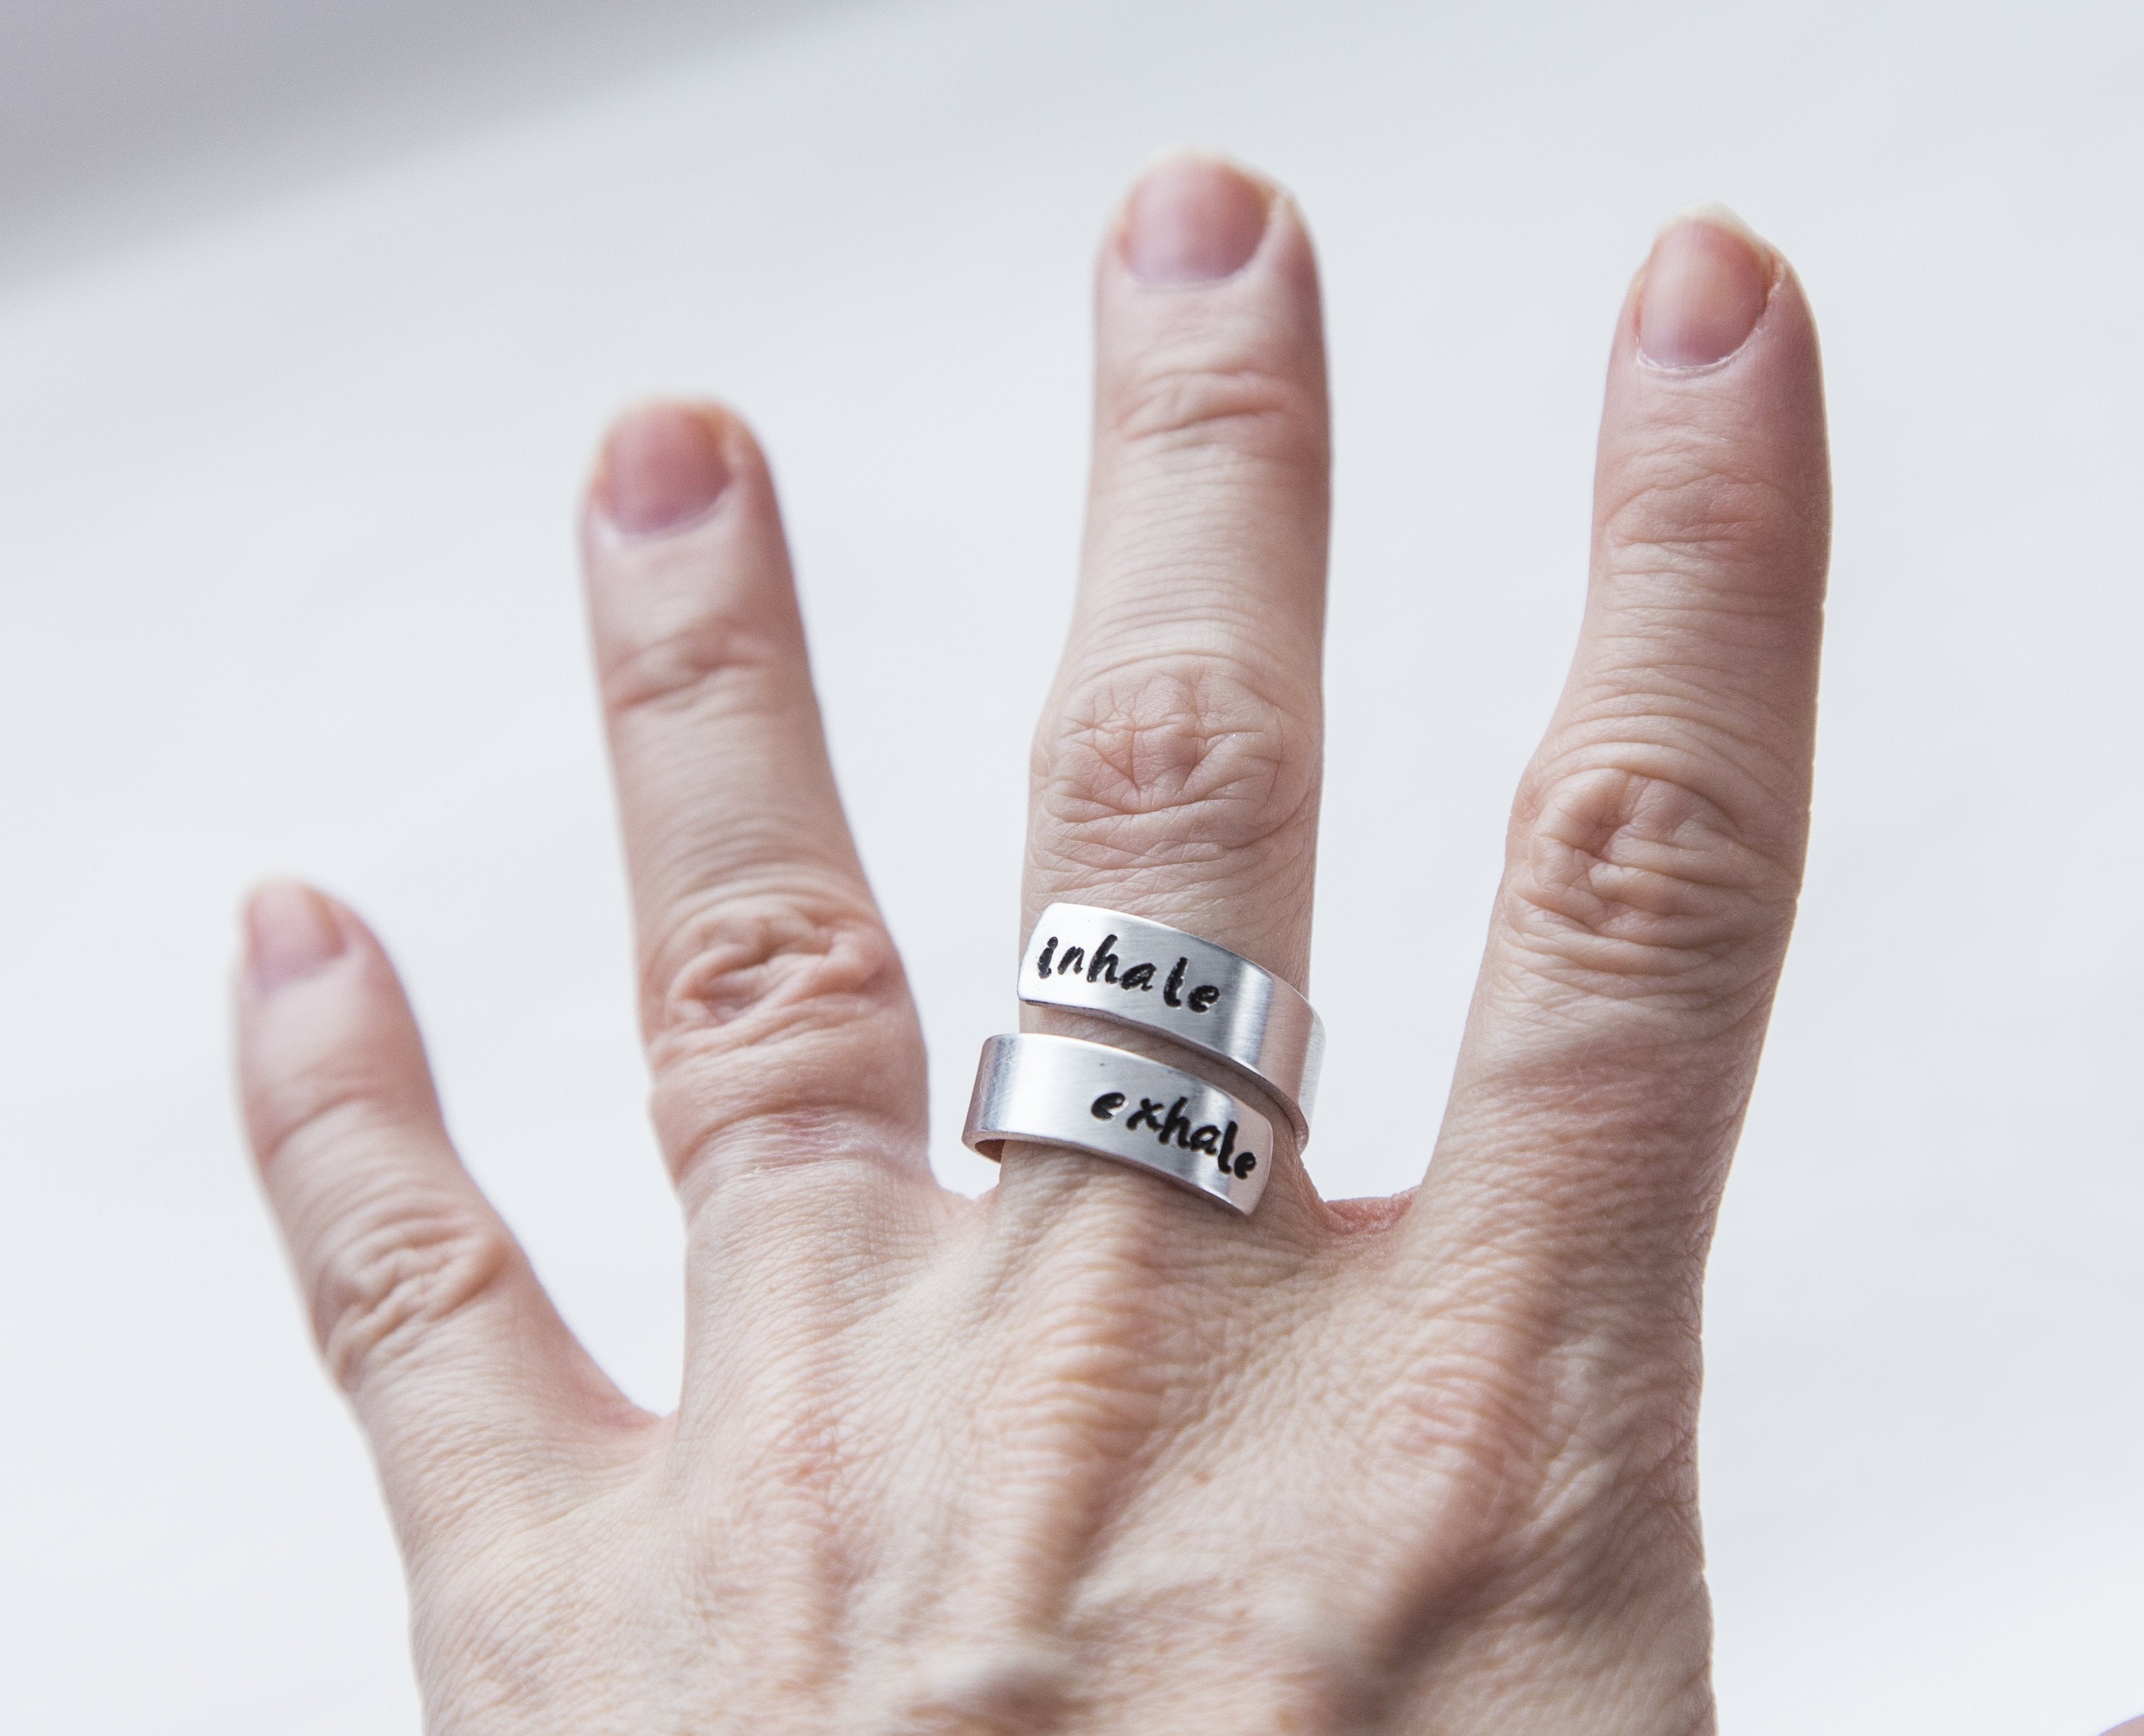 Custom Stamped Inhale Exhale Yoga Ring - Adjustable Aluminum Stamped Wrap Ring for Meditation and Yoga Lovers Bijou Her